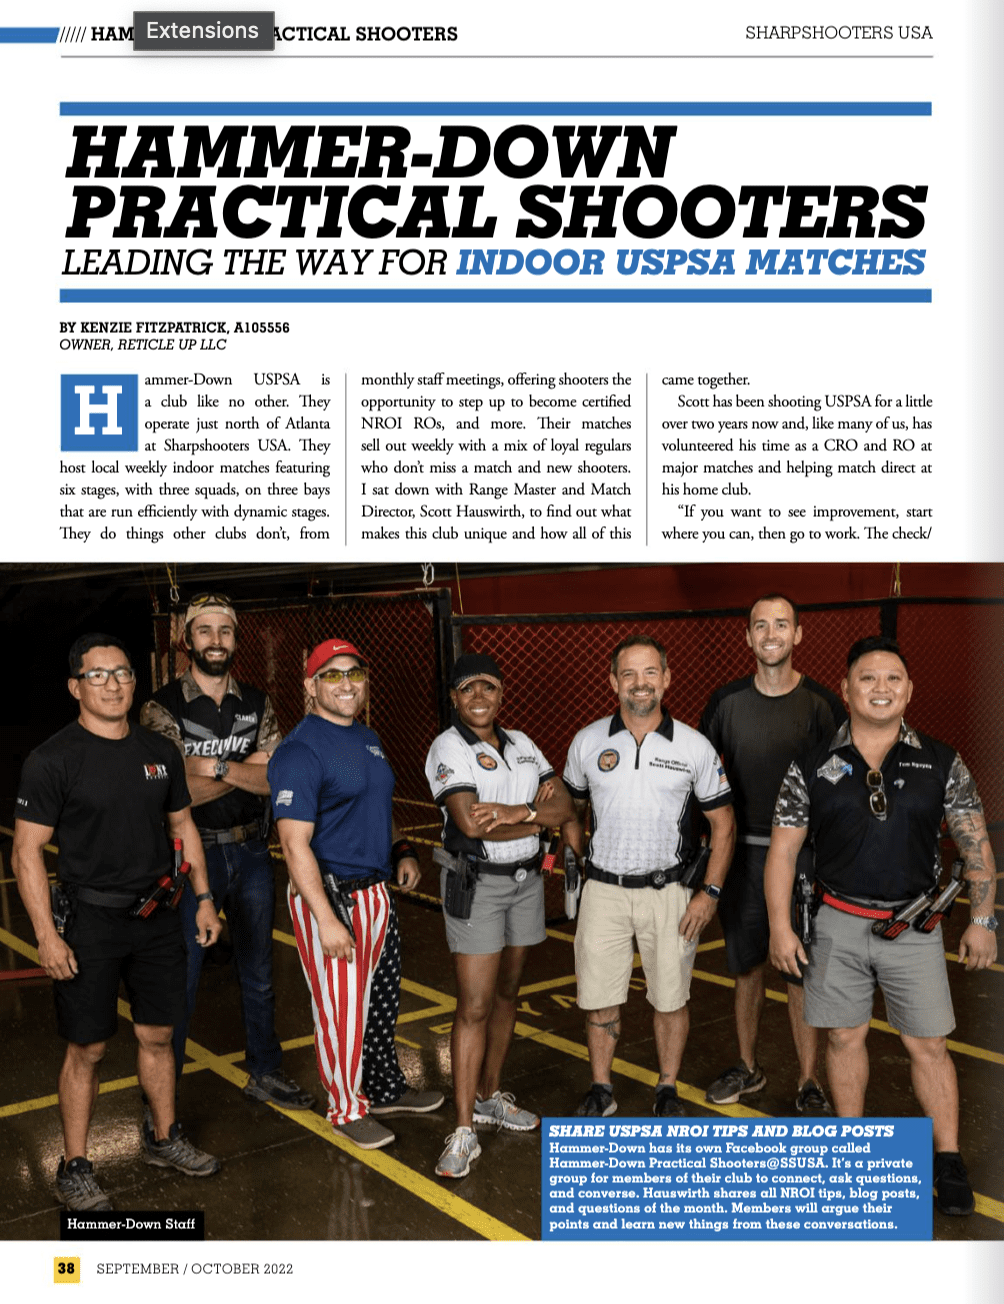 Hammer-Down Practical Shooters: Leading the Way for Indoor USPSA Matches